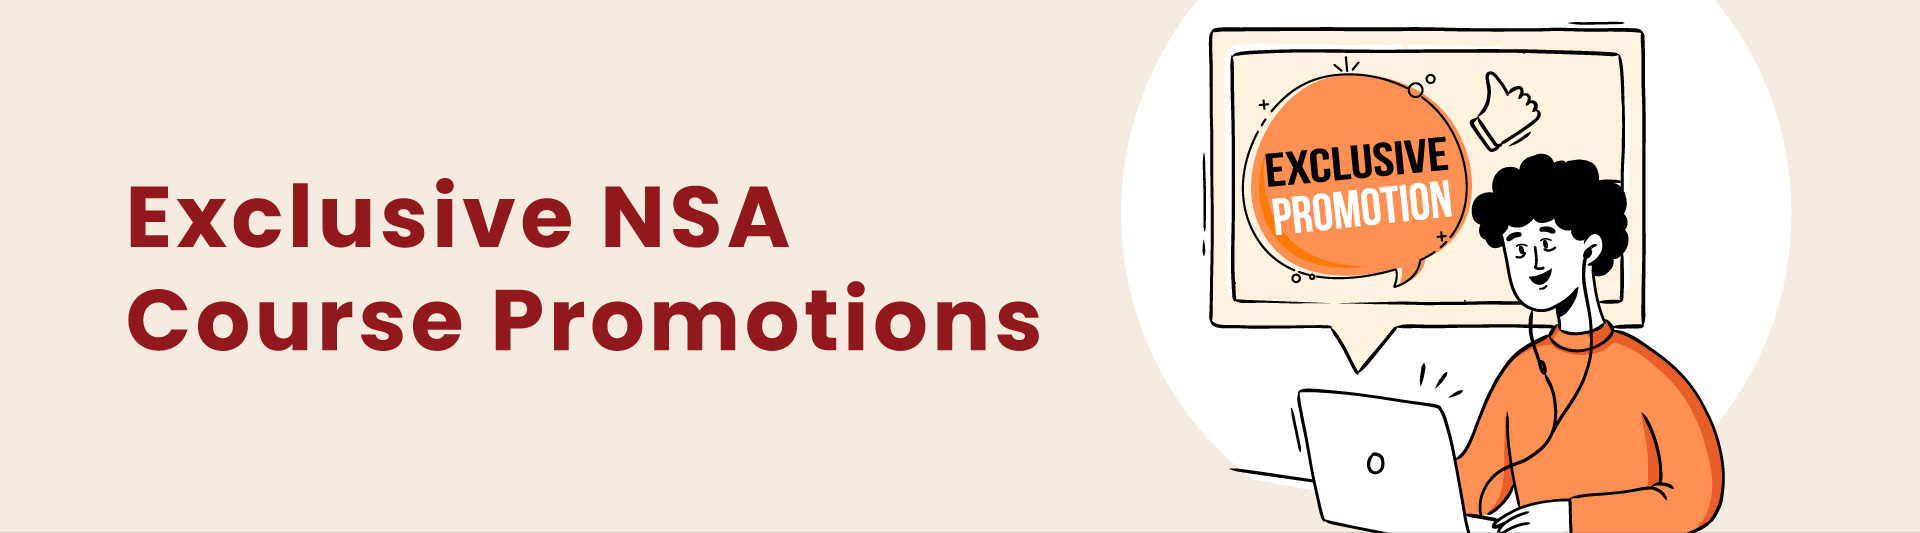 Exclusive NSA Course Promotions Banner